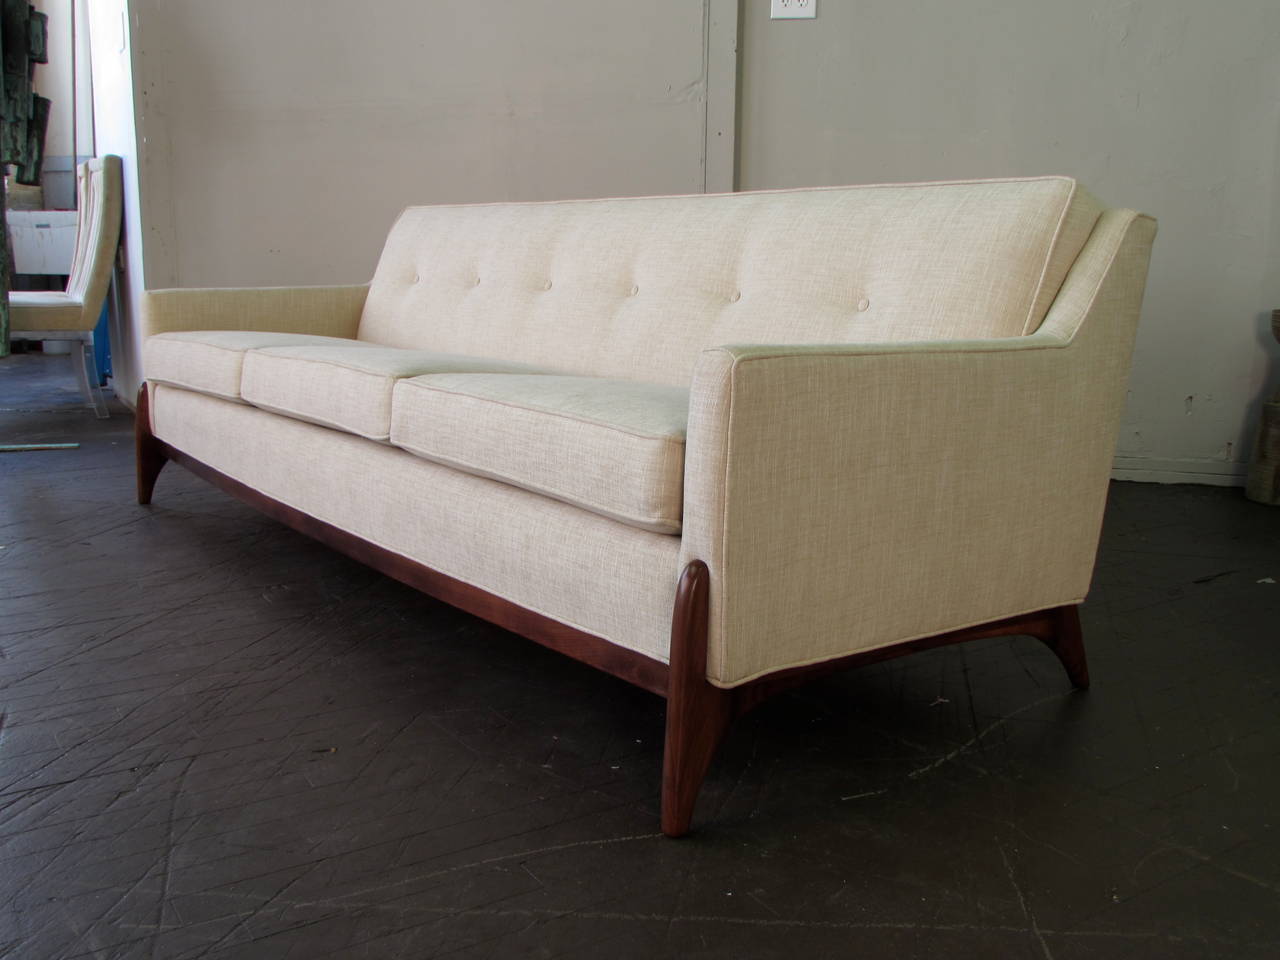 Stunning Mid-Century Modern Sofa with Sculptural Legs, circa 1950. This piece is a favorite of ours. Maker is unknown but the design is exceptional and the quality is superb. Newly upholstered in a textured oatmeal fabric that is of the period.